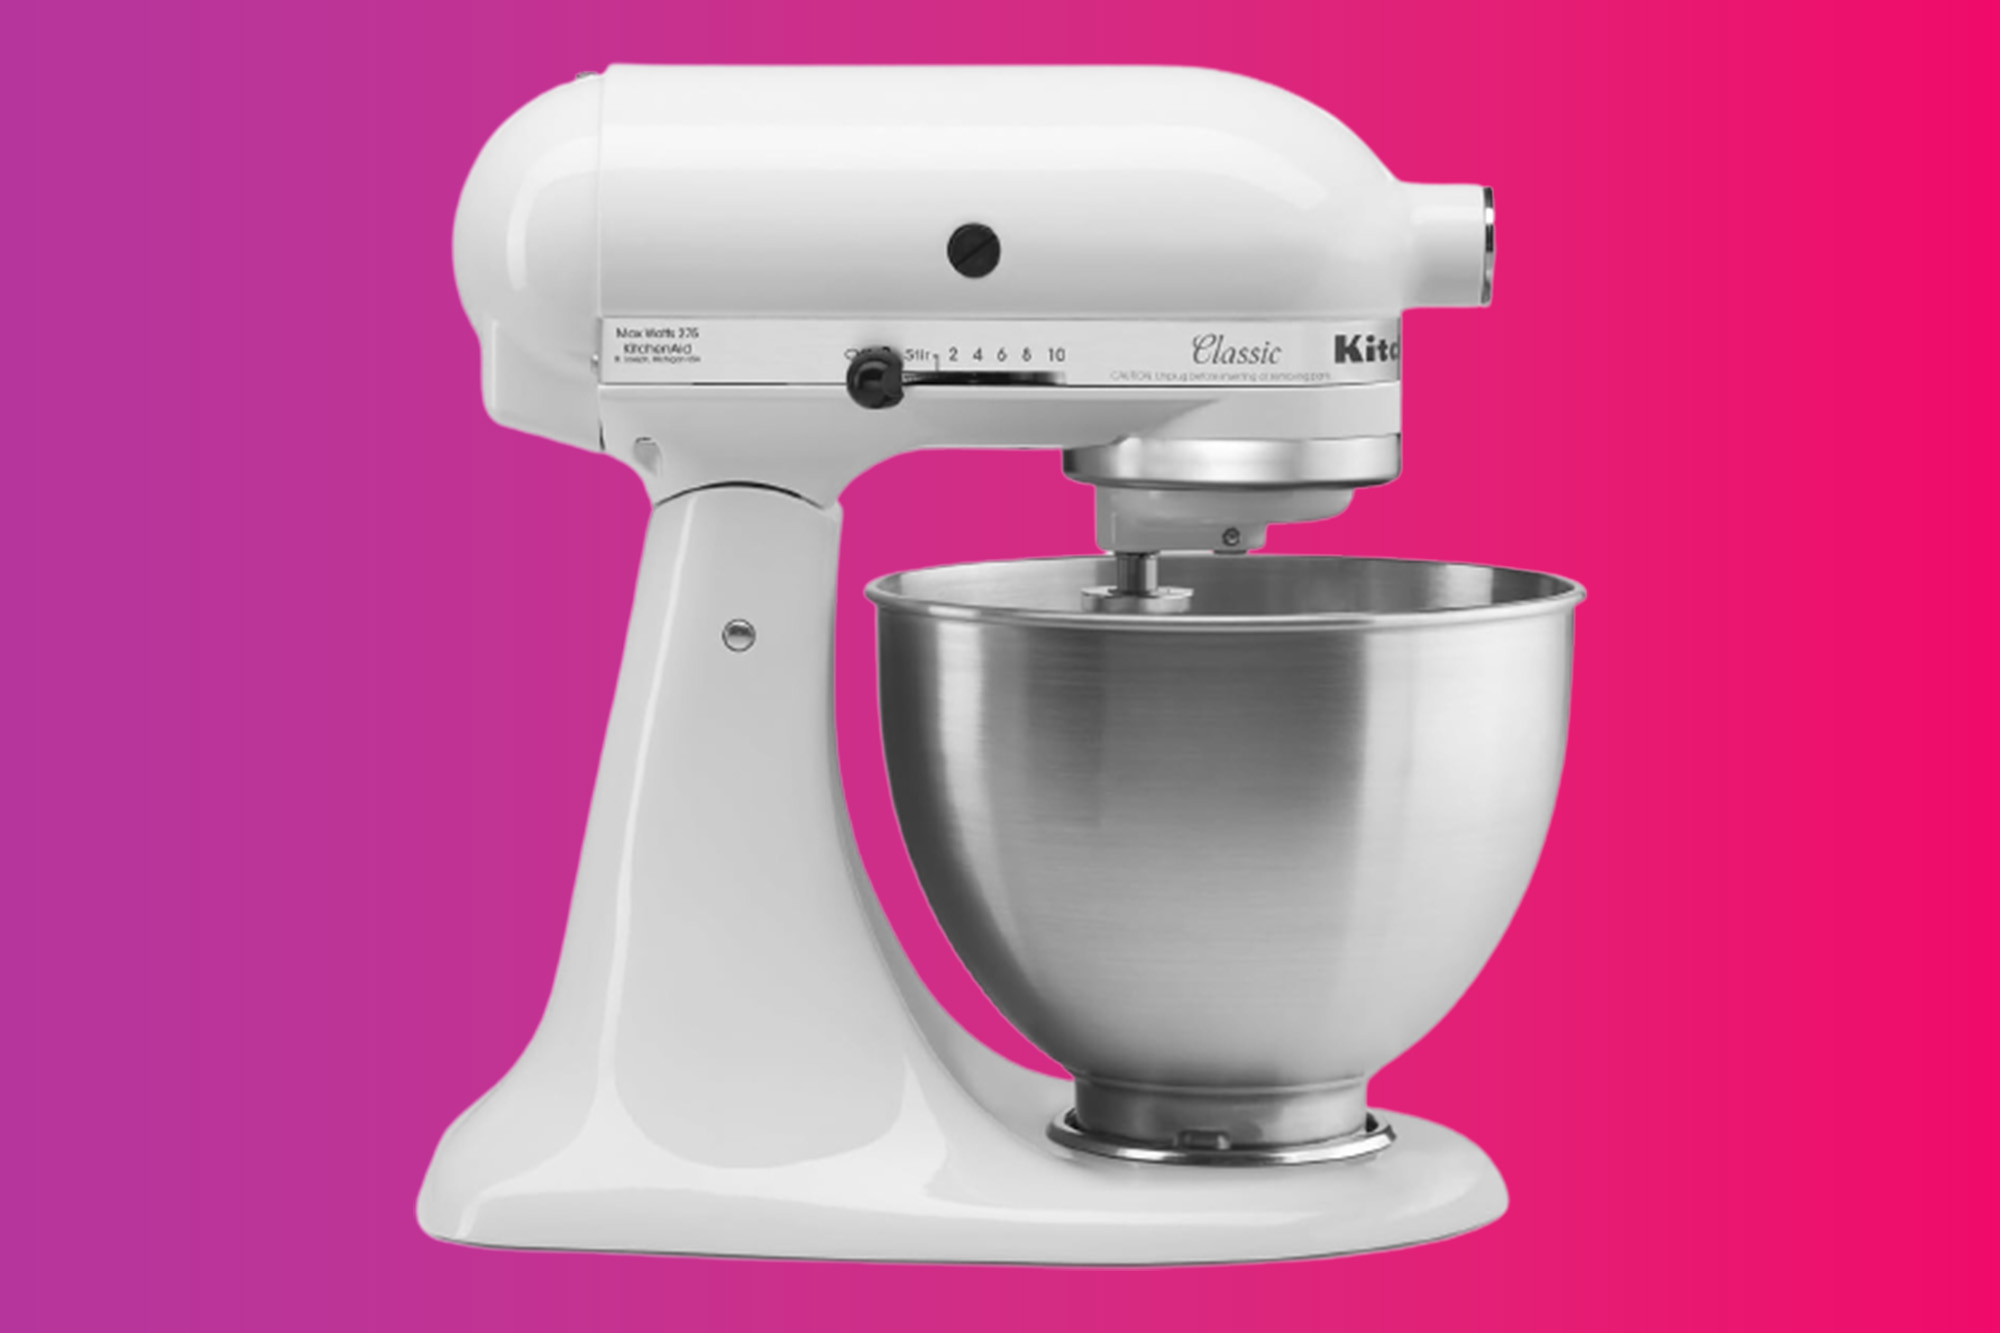 Don't Wait: You Can Get a Classic KitchenAid Stand Mixer at the